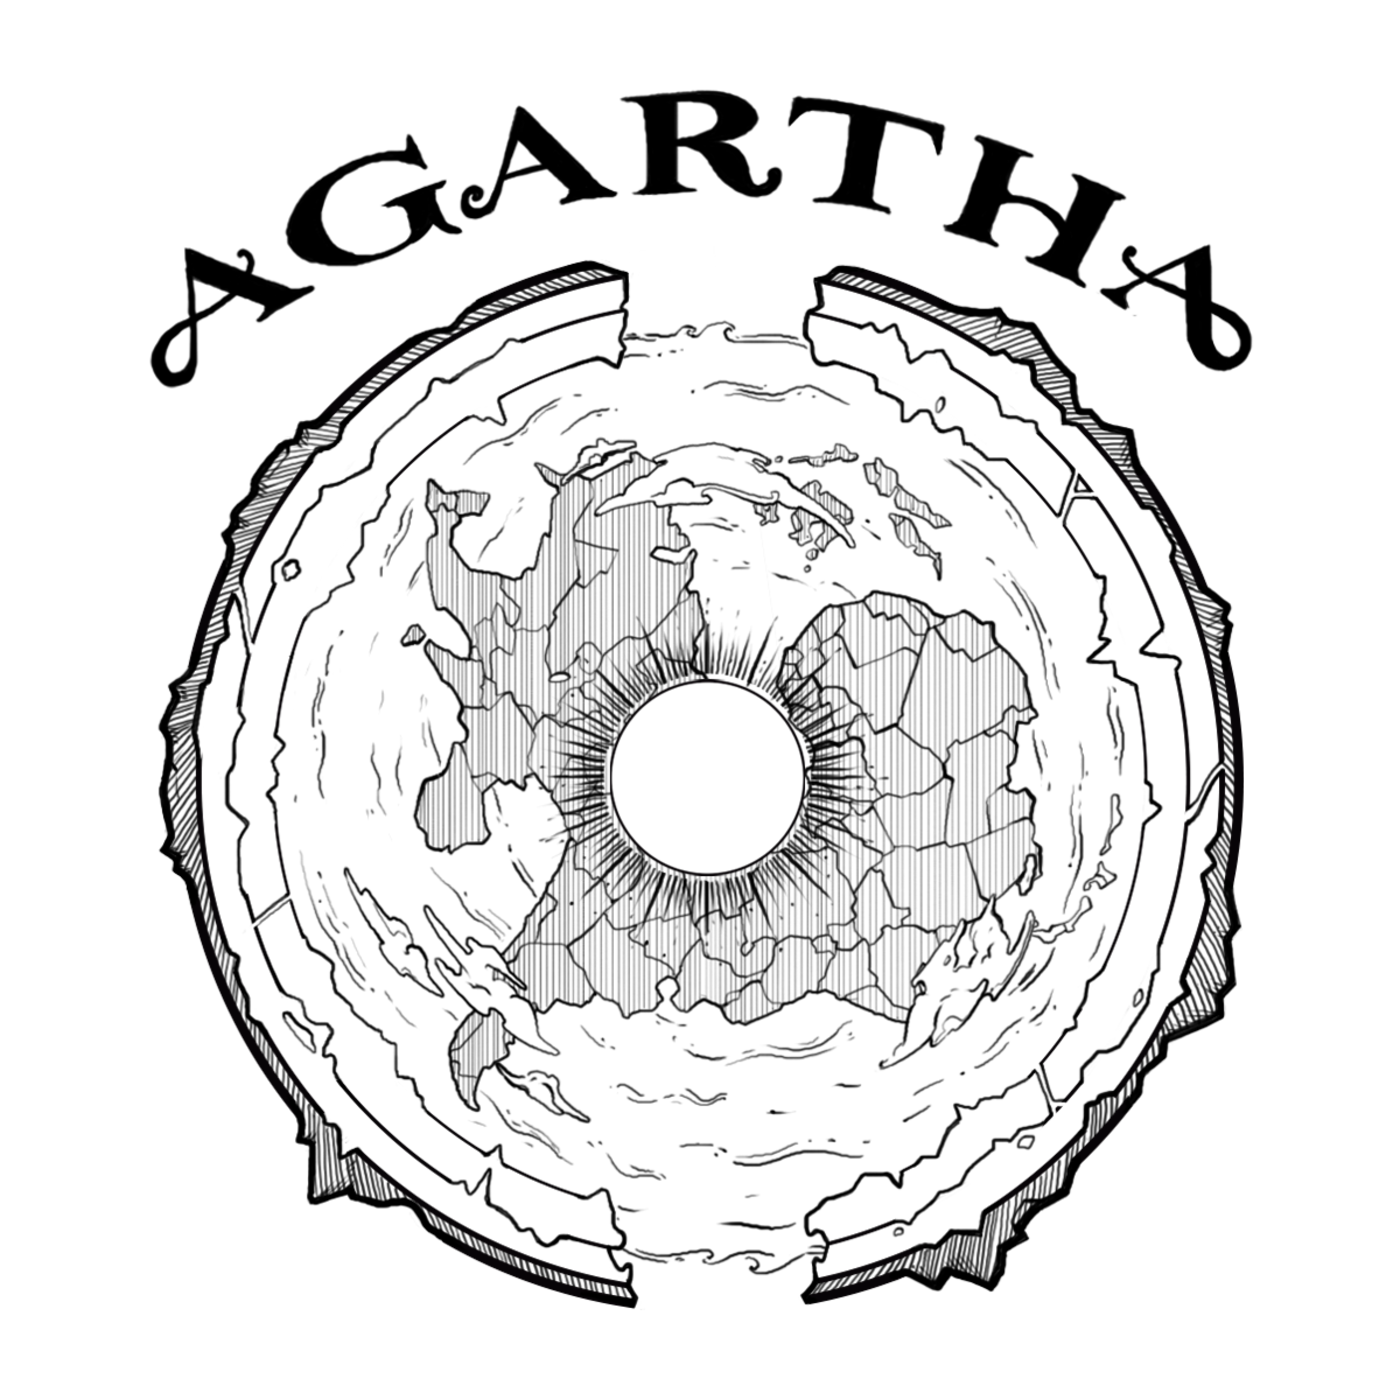 Interview with AGARTHA